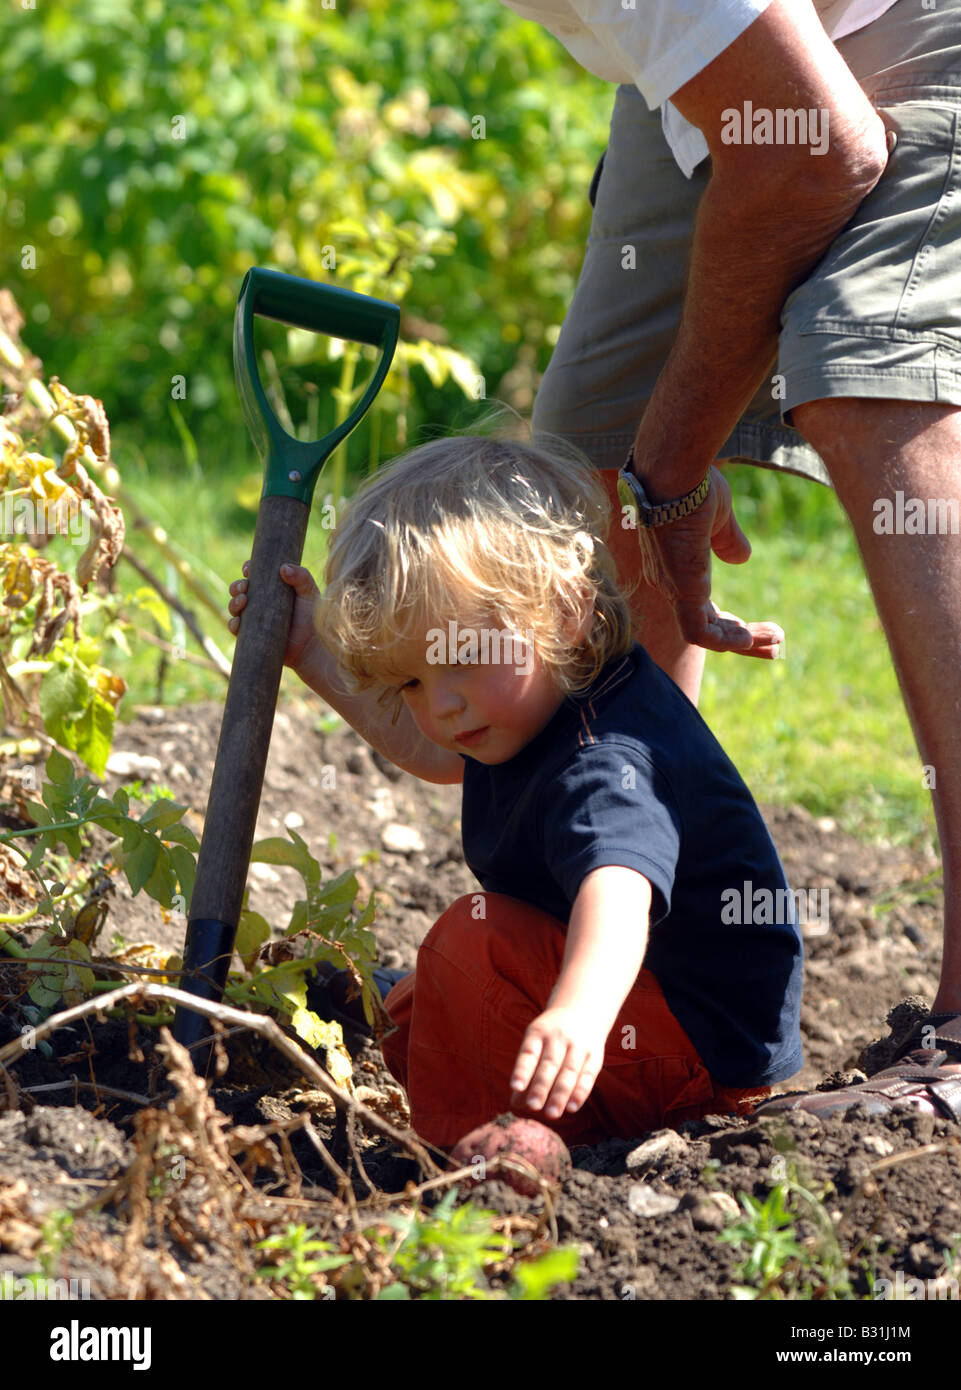 Child helping to dig up potatoes in a garden Stock Photo